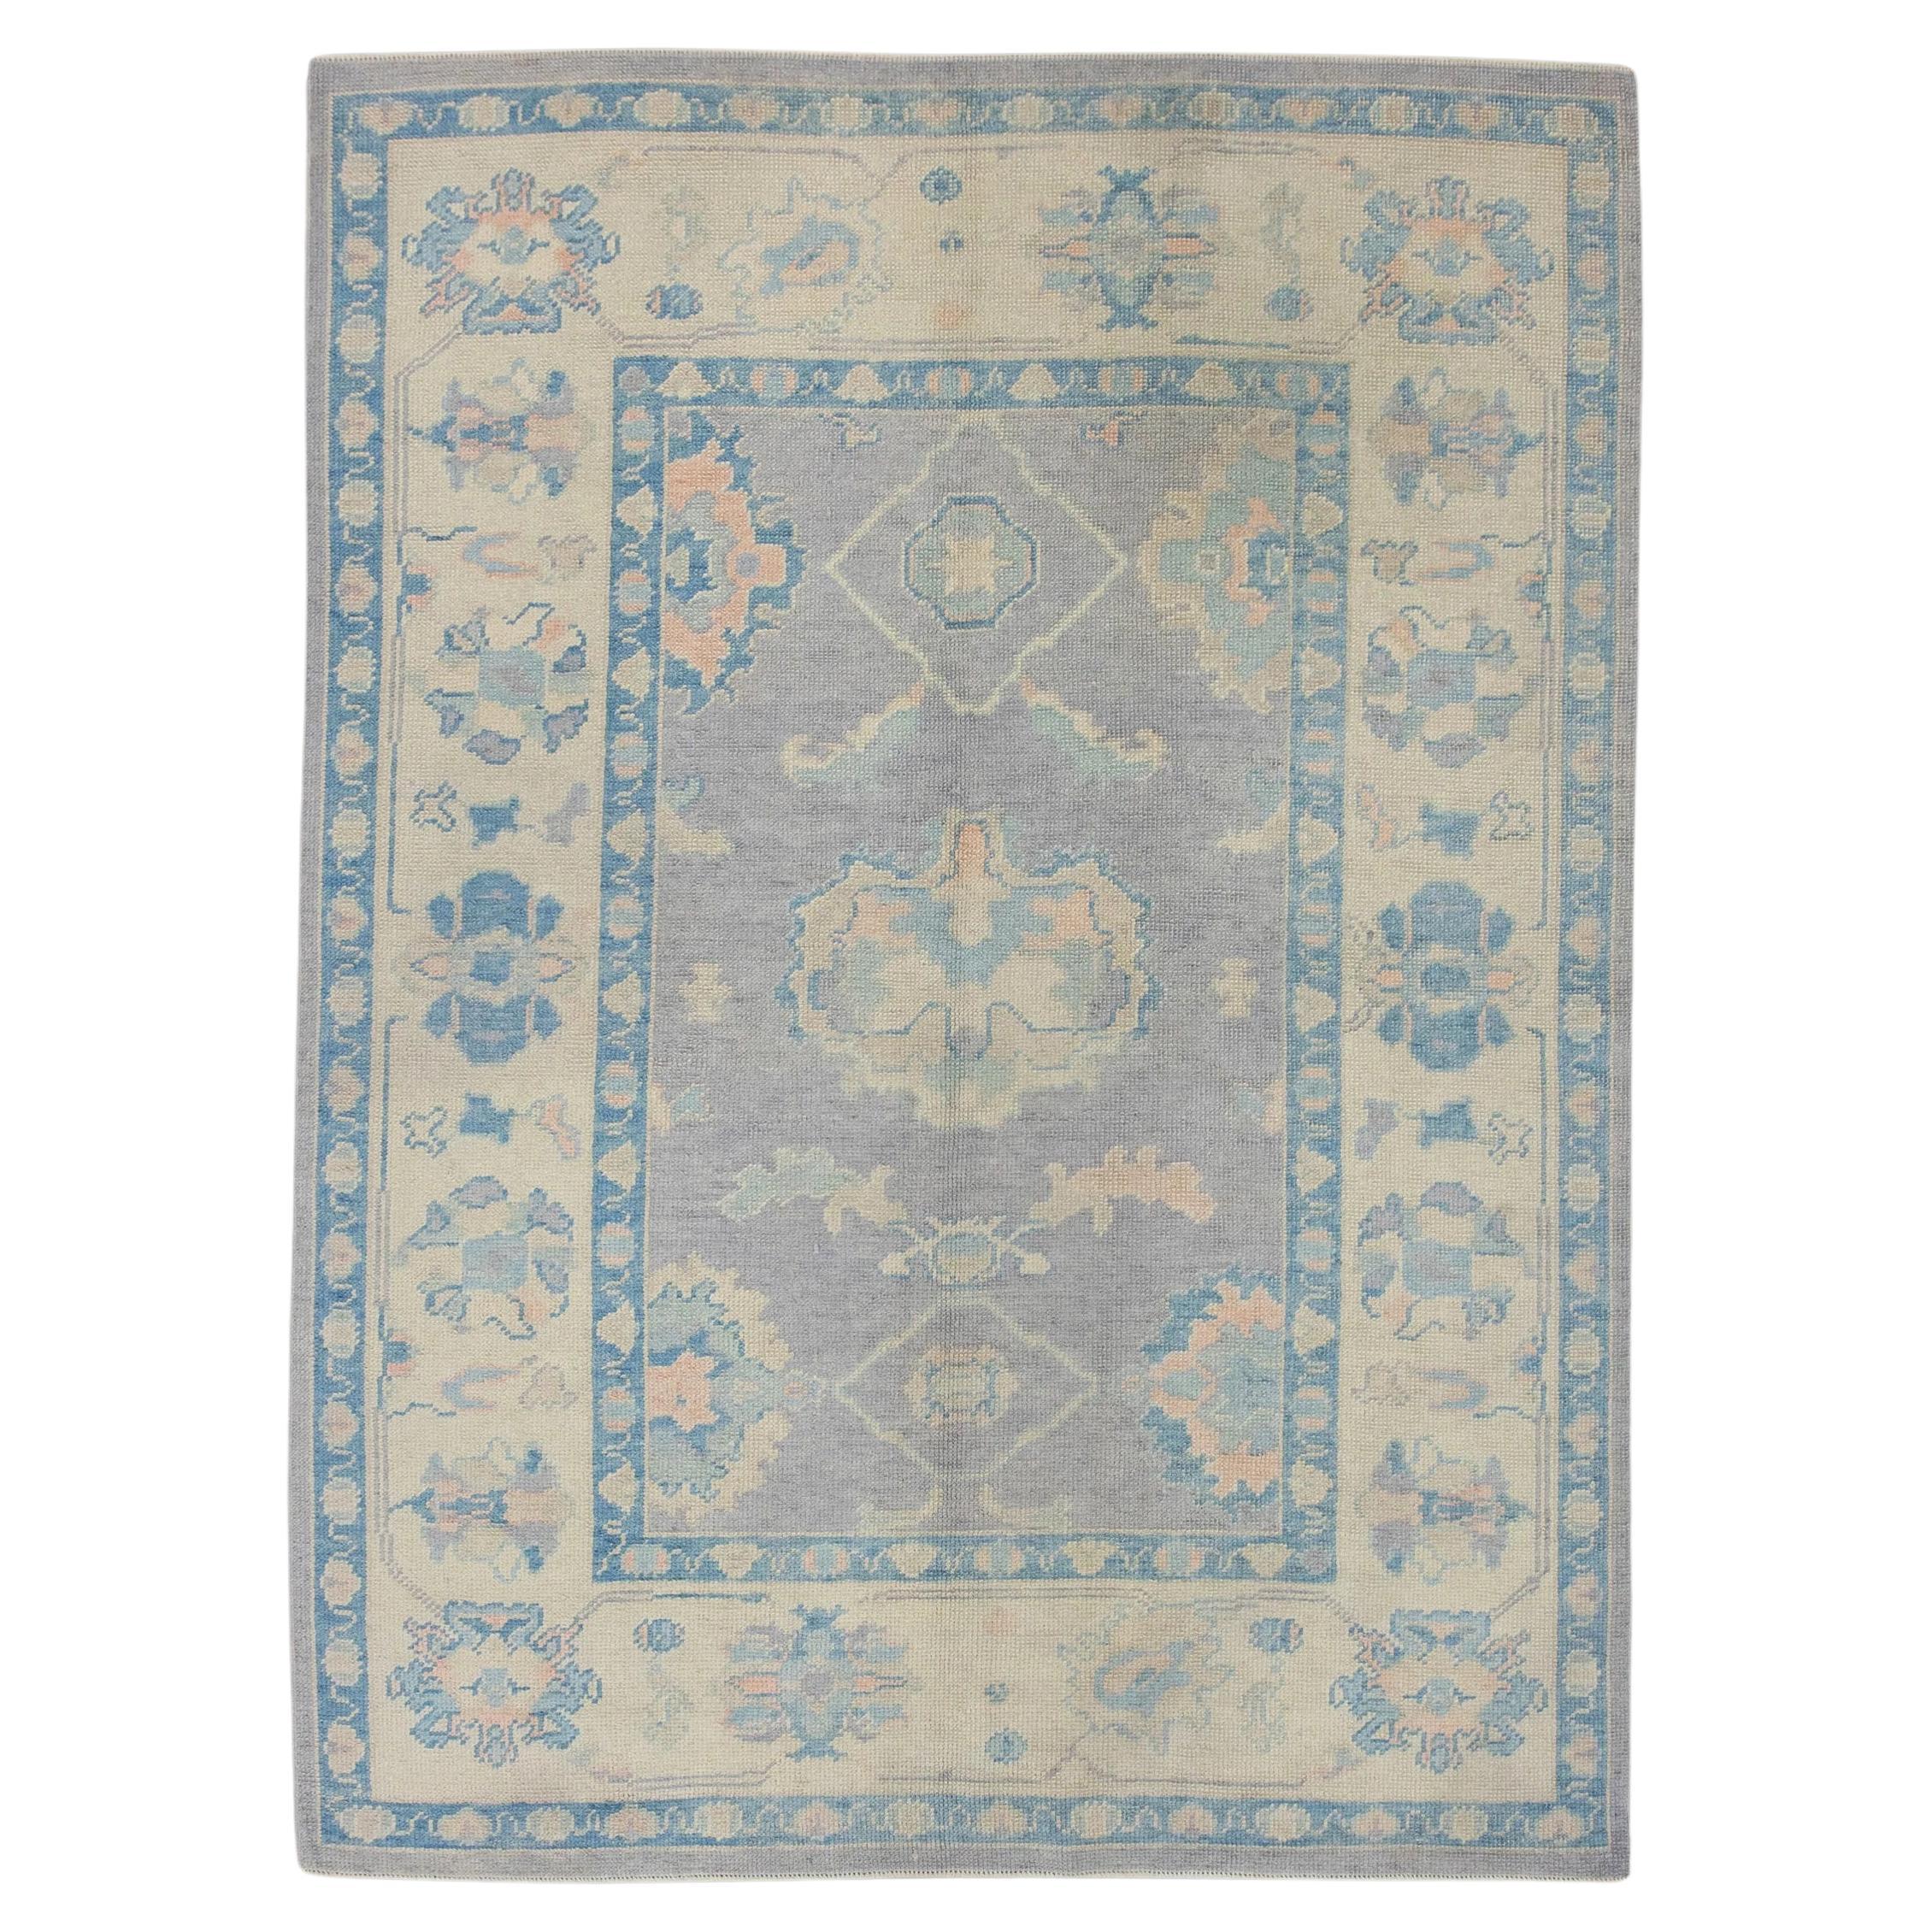 Purple and Blue Floral Handwoven Wool Turkish Oushak Rug 5'3" x 6'11"